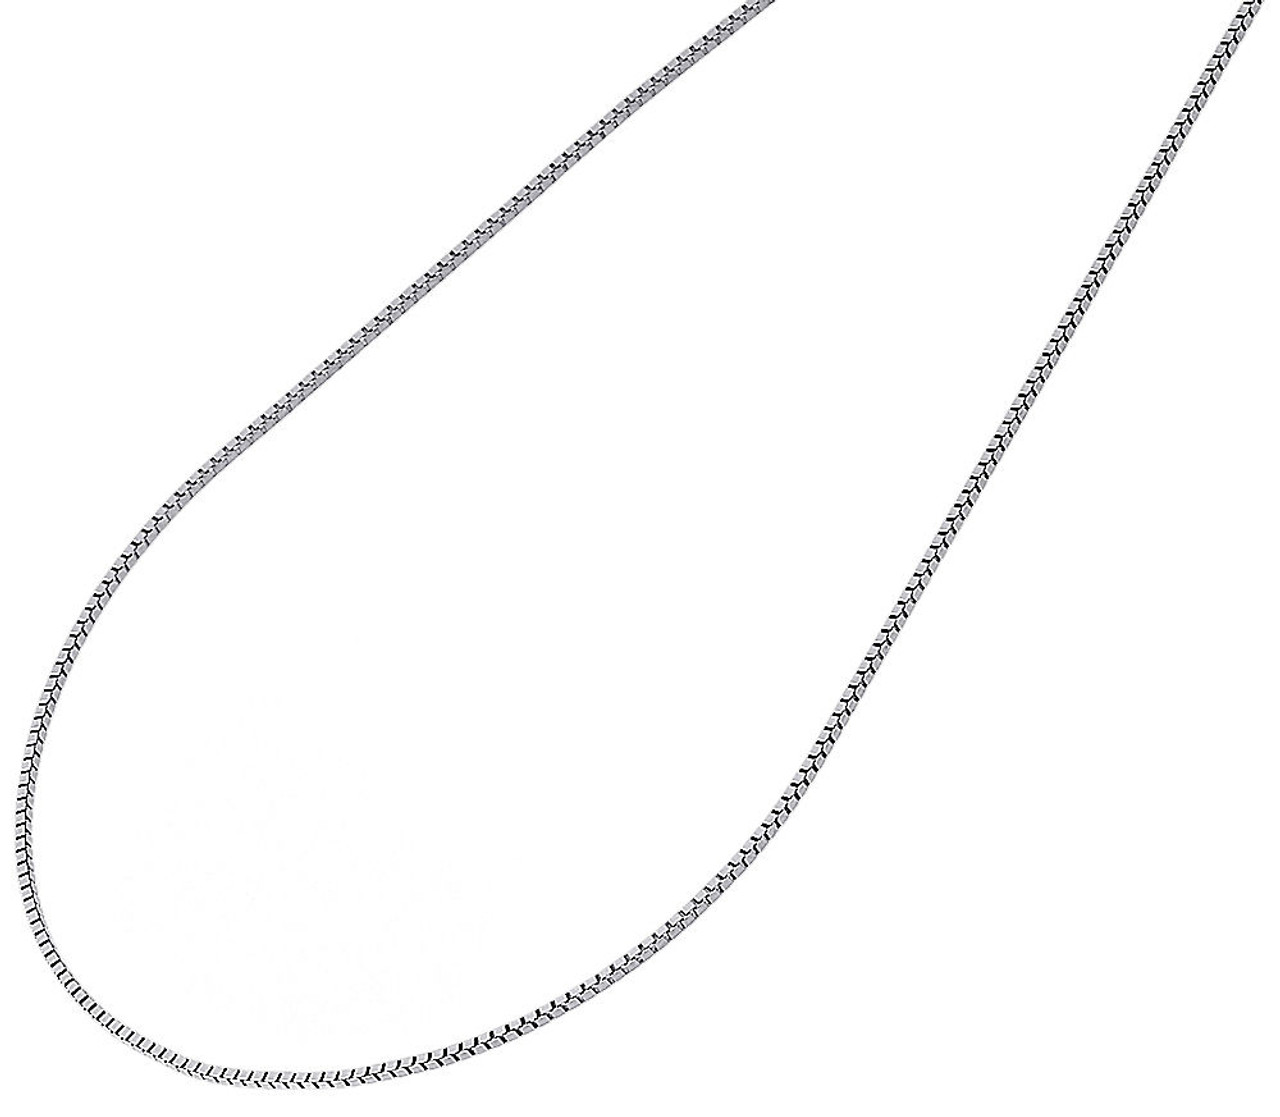 10K White Gold 0.50 mm Solid Box Chain Necklace 16", 18", 20", 22" & 24" Length